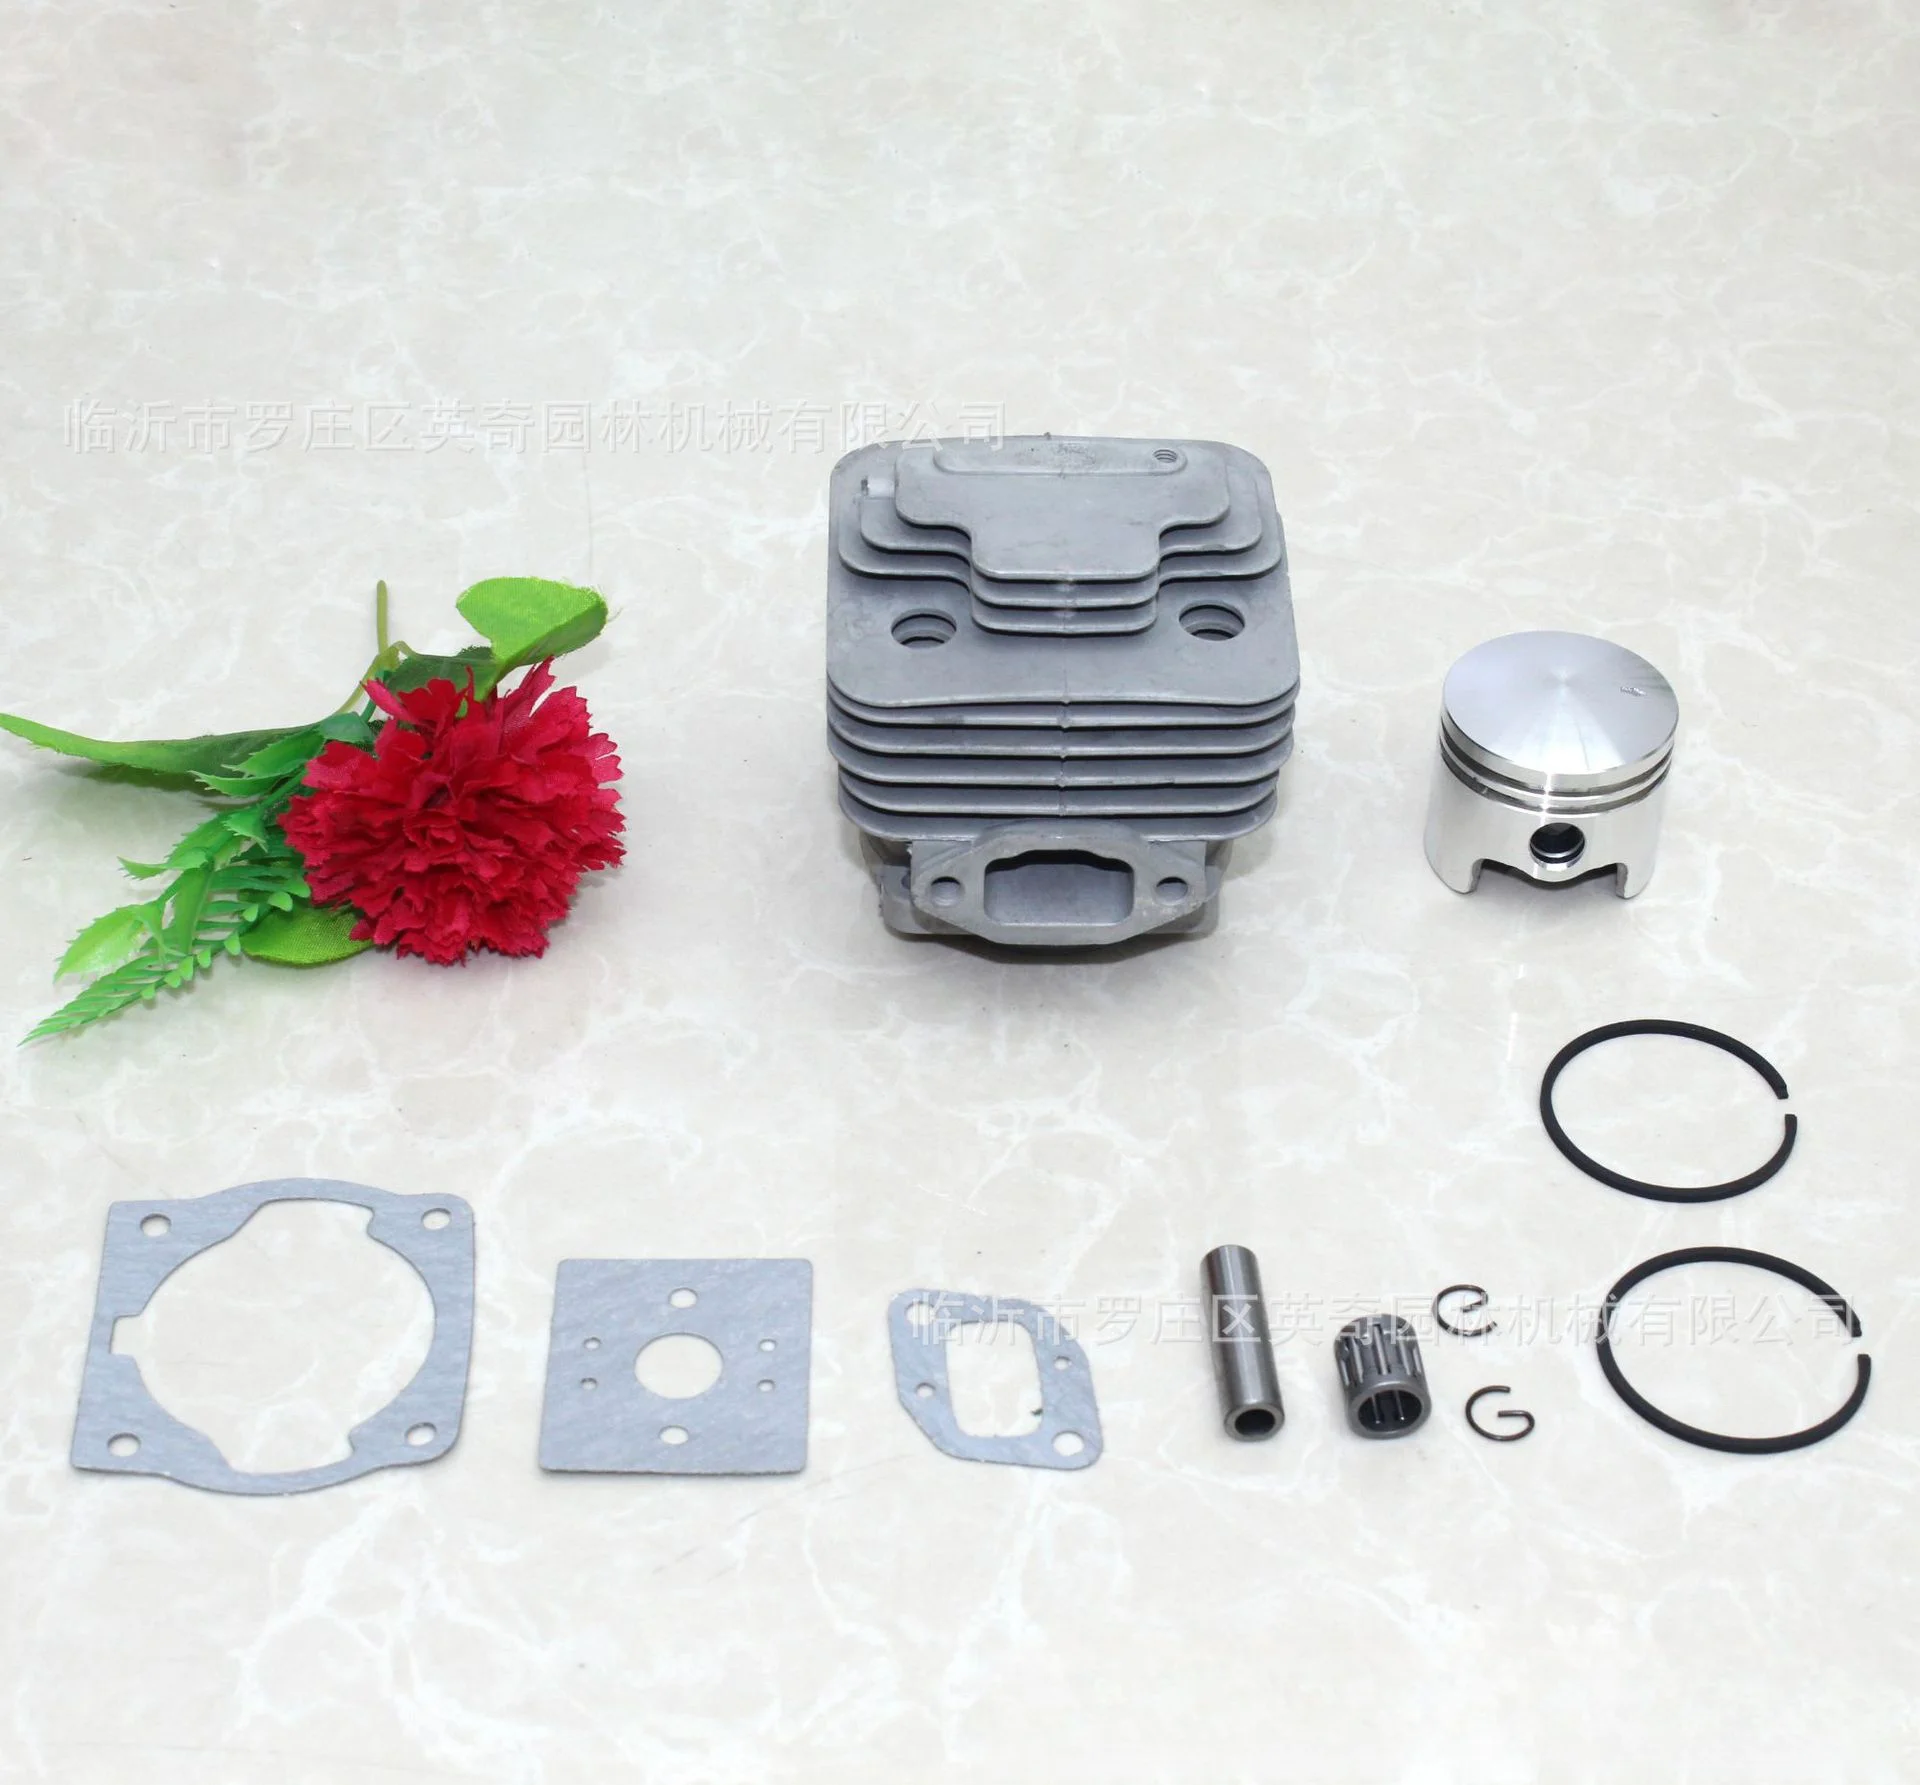 

44-2 Set Cylinder Gasoline Engine Accessories 52CC Brush Cutter Piston Pin Stop Ring Needle Roller Piston Needle